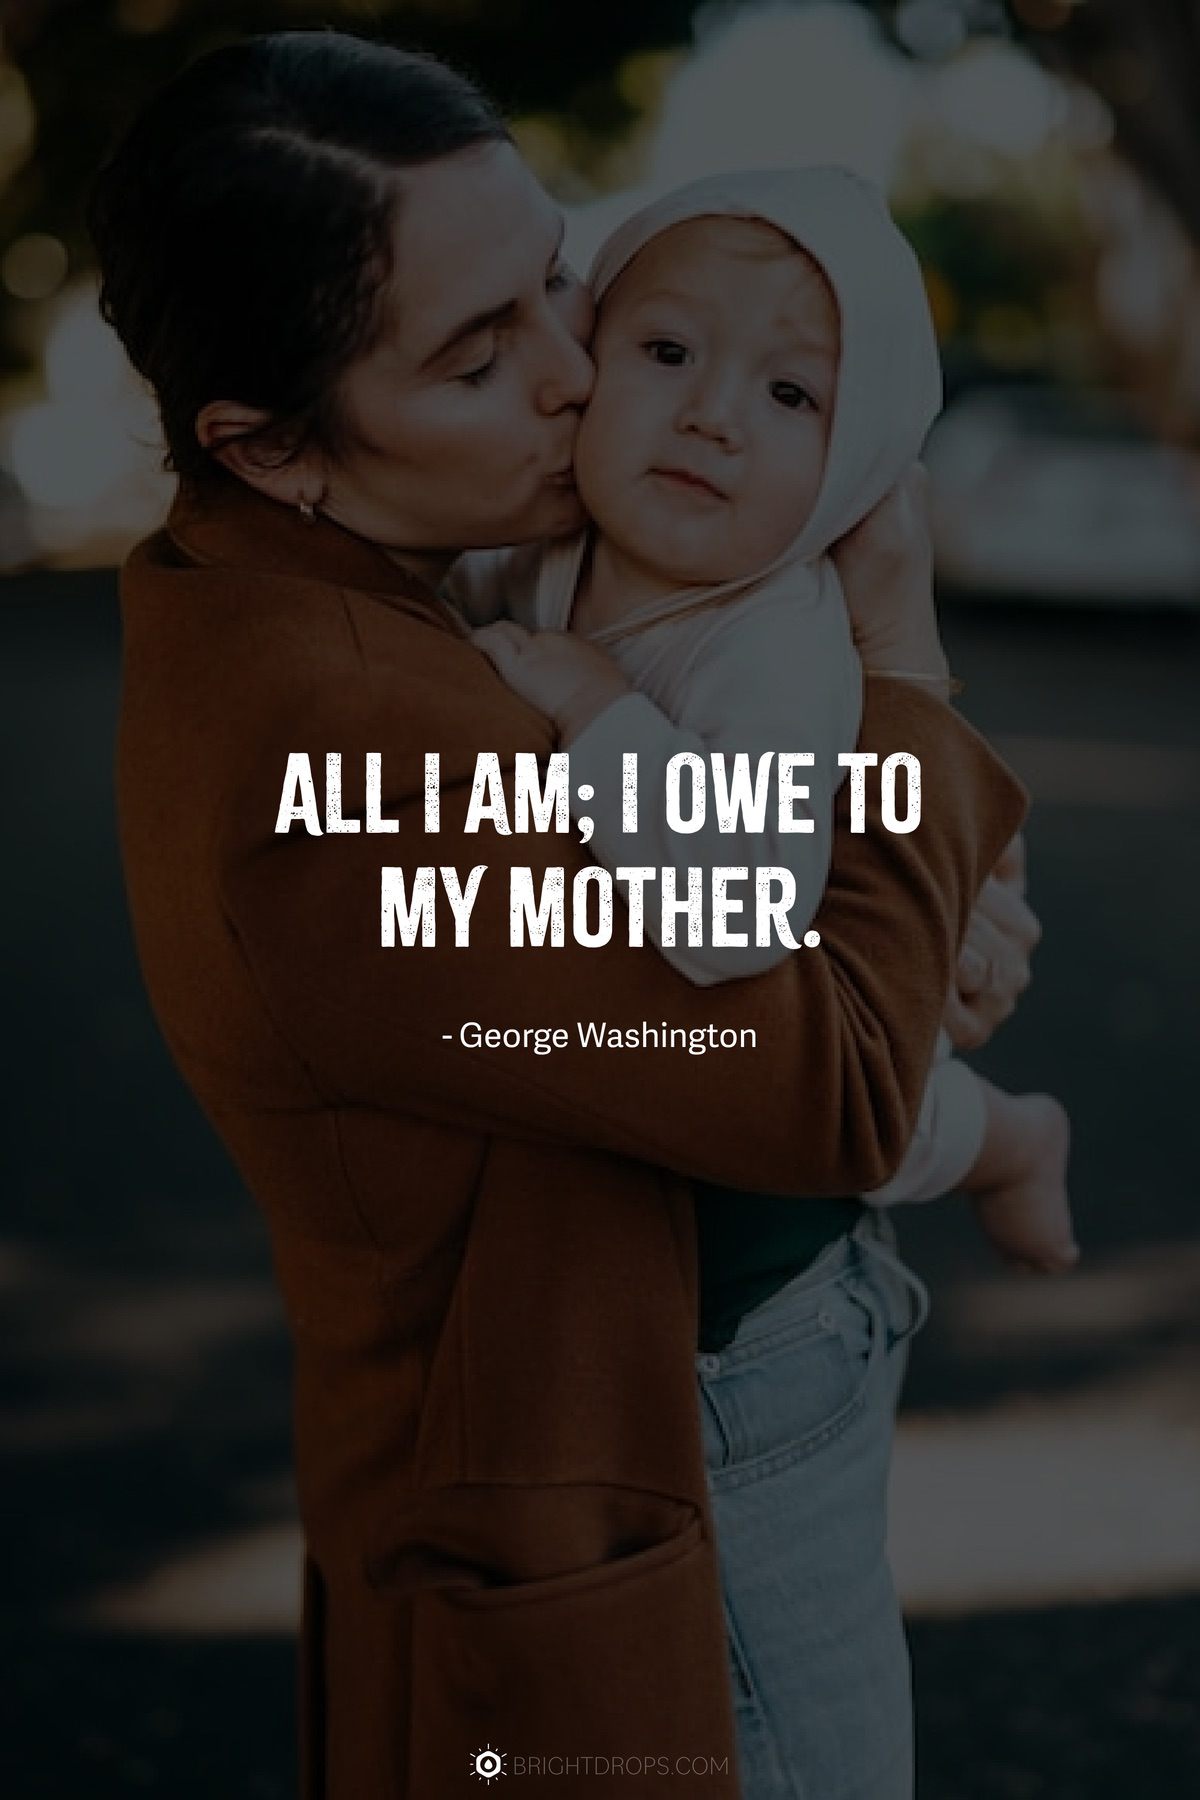 All I am; I owe to my mother.